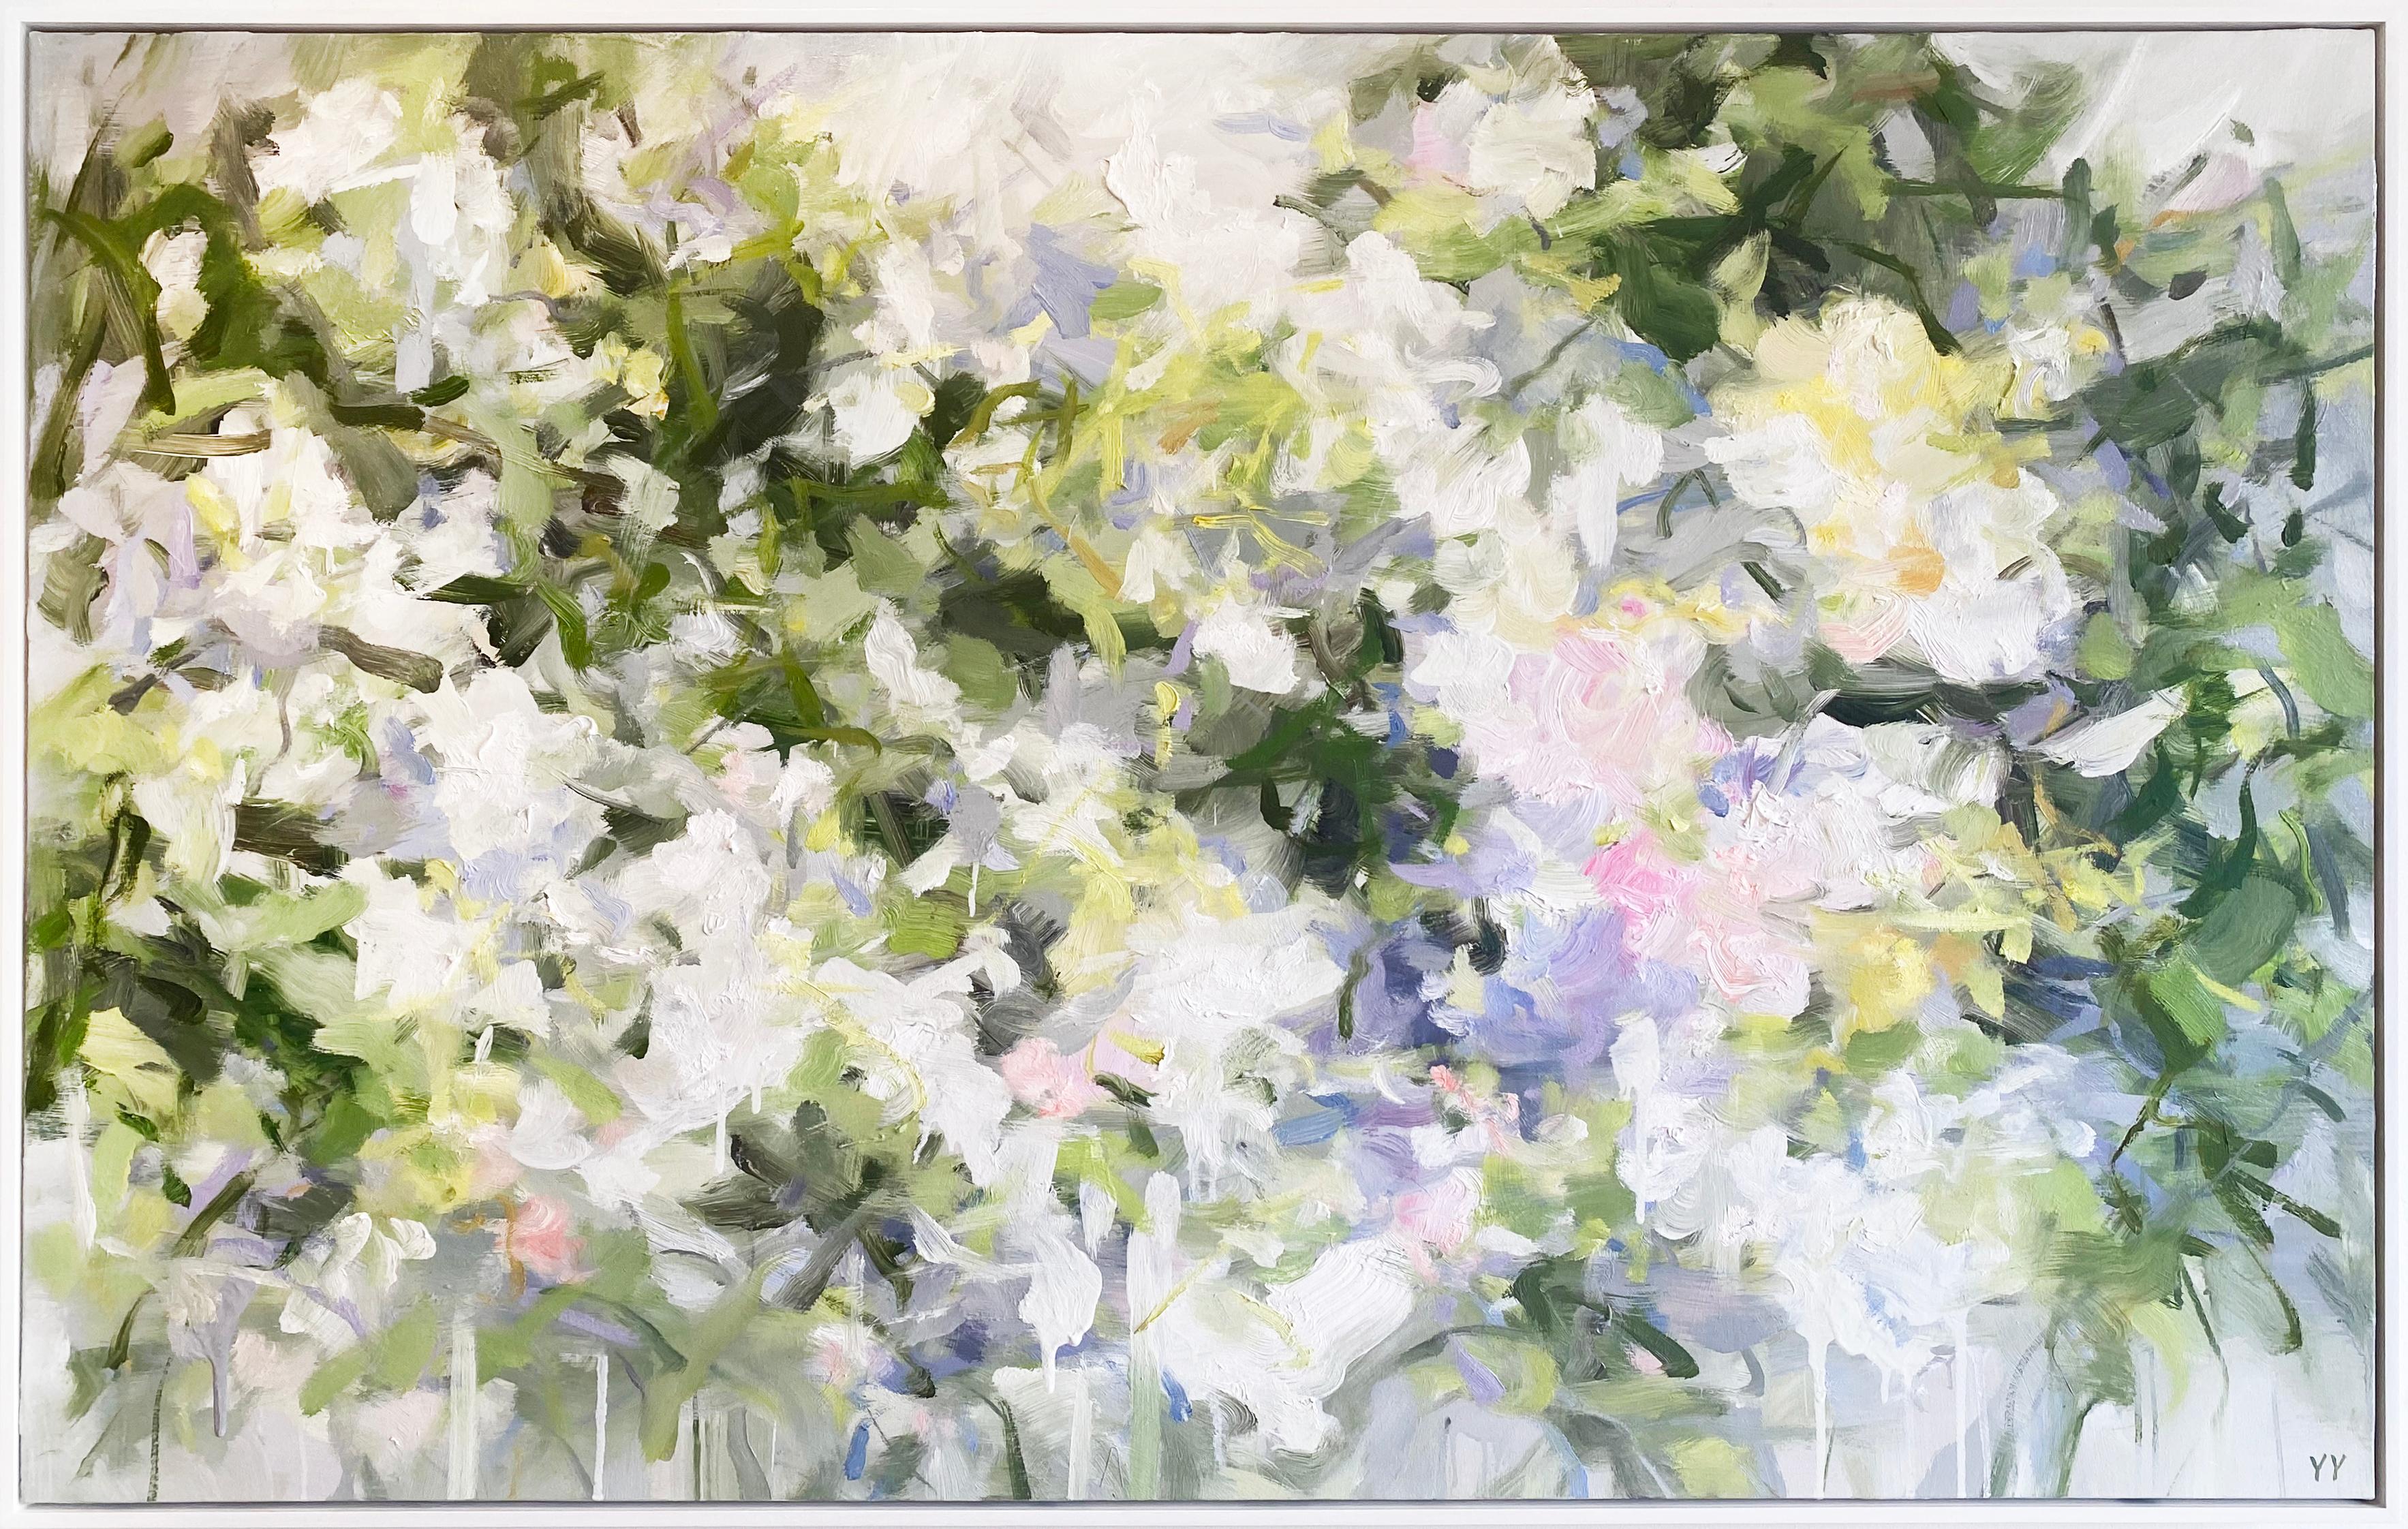 'Delicate Breeze' 2021 by Chinese/Canadian artist Yangyang Pan. Oil on canvas, 30 x 48 in. This beautiful abstract-expressionistic painting incorporates gestural brushstrokes in pastel colors of green, white, pink, yellow, and blue. It is framed in